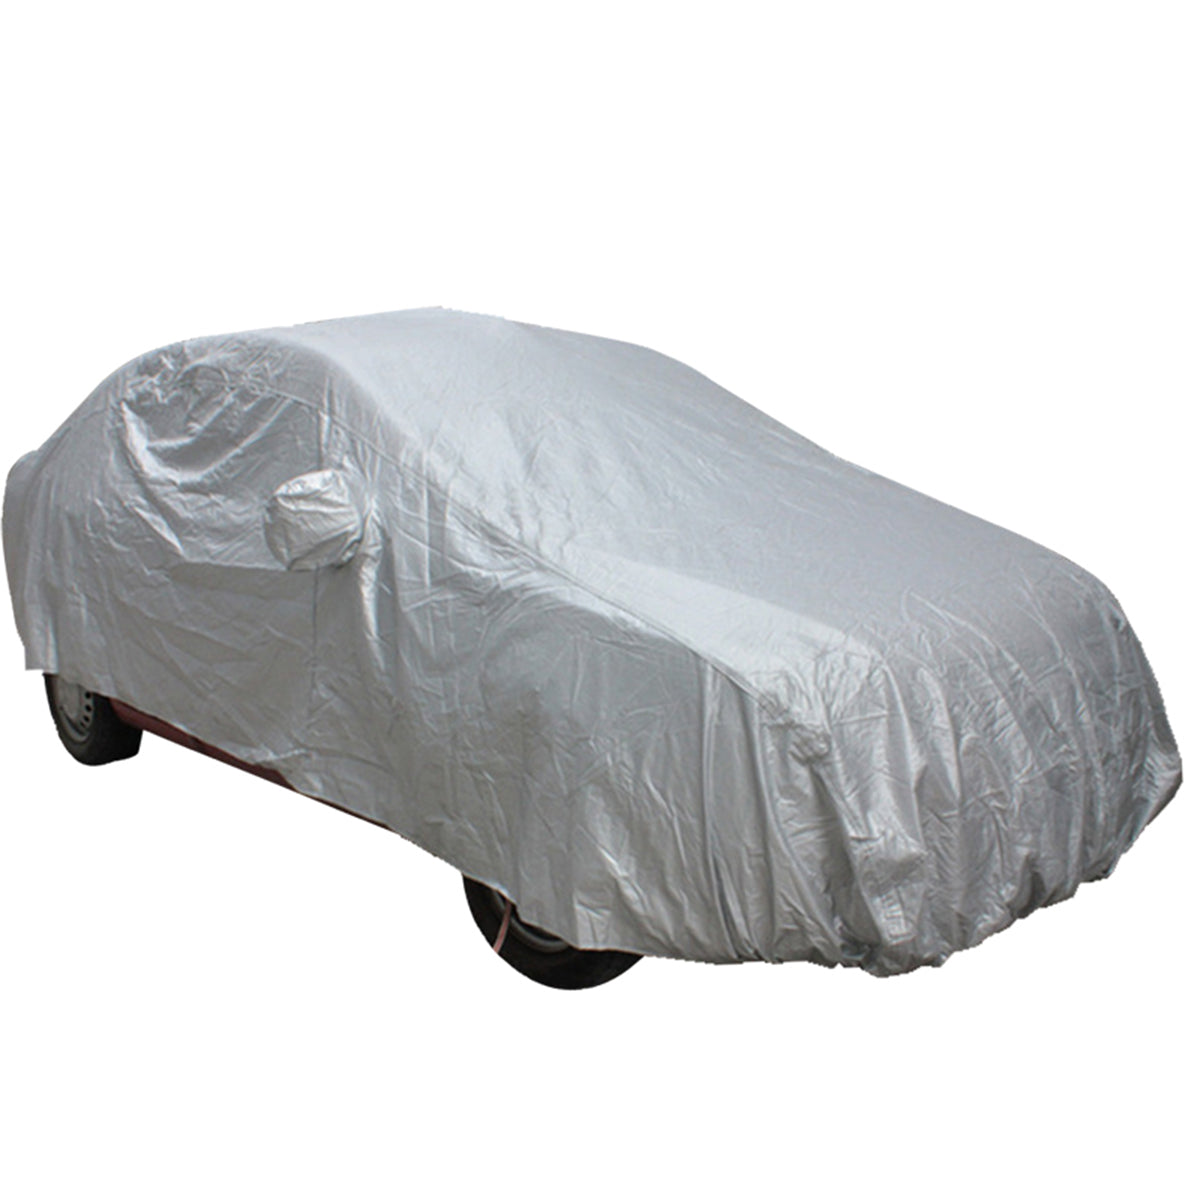 Gray Universal Car Cover Waterproof Dirt Rain Snow Outdoor Protector For SUV Pickup